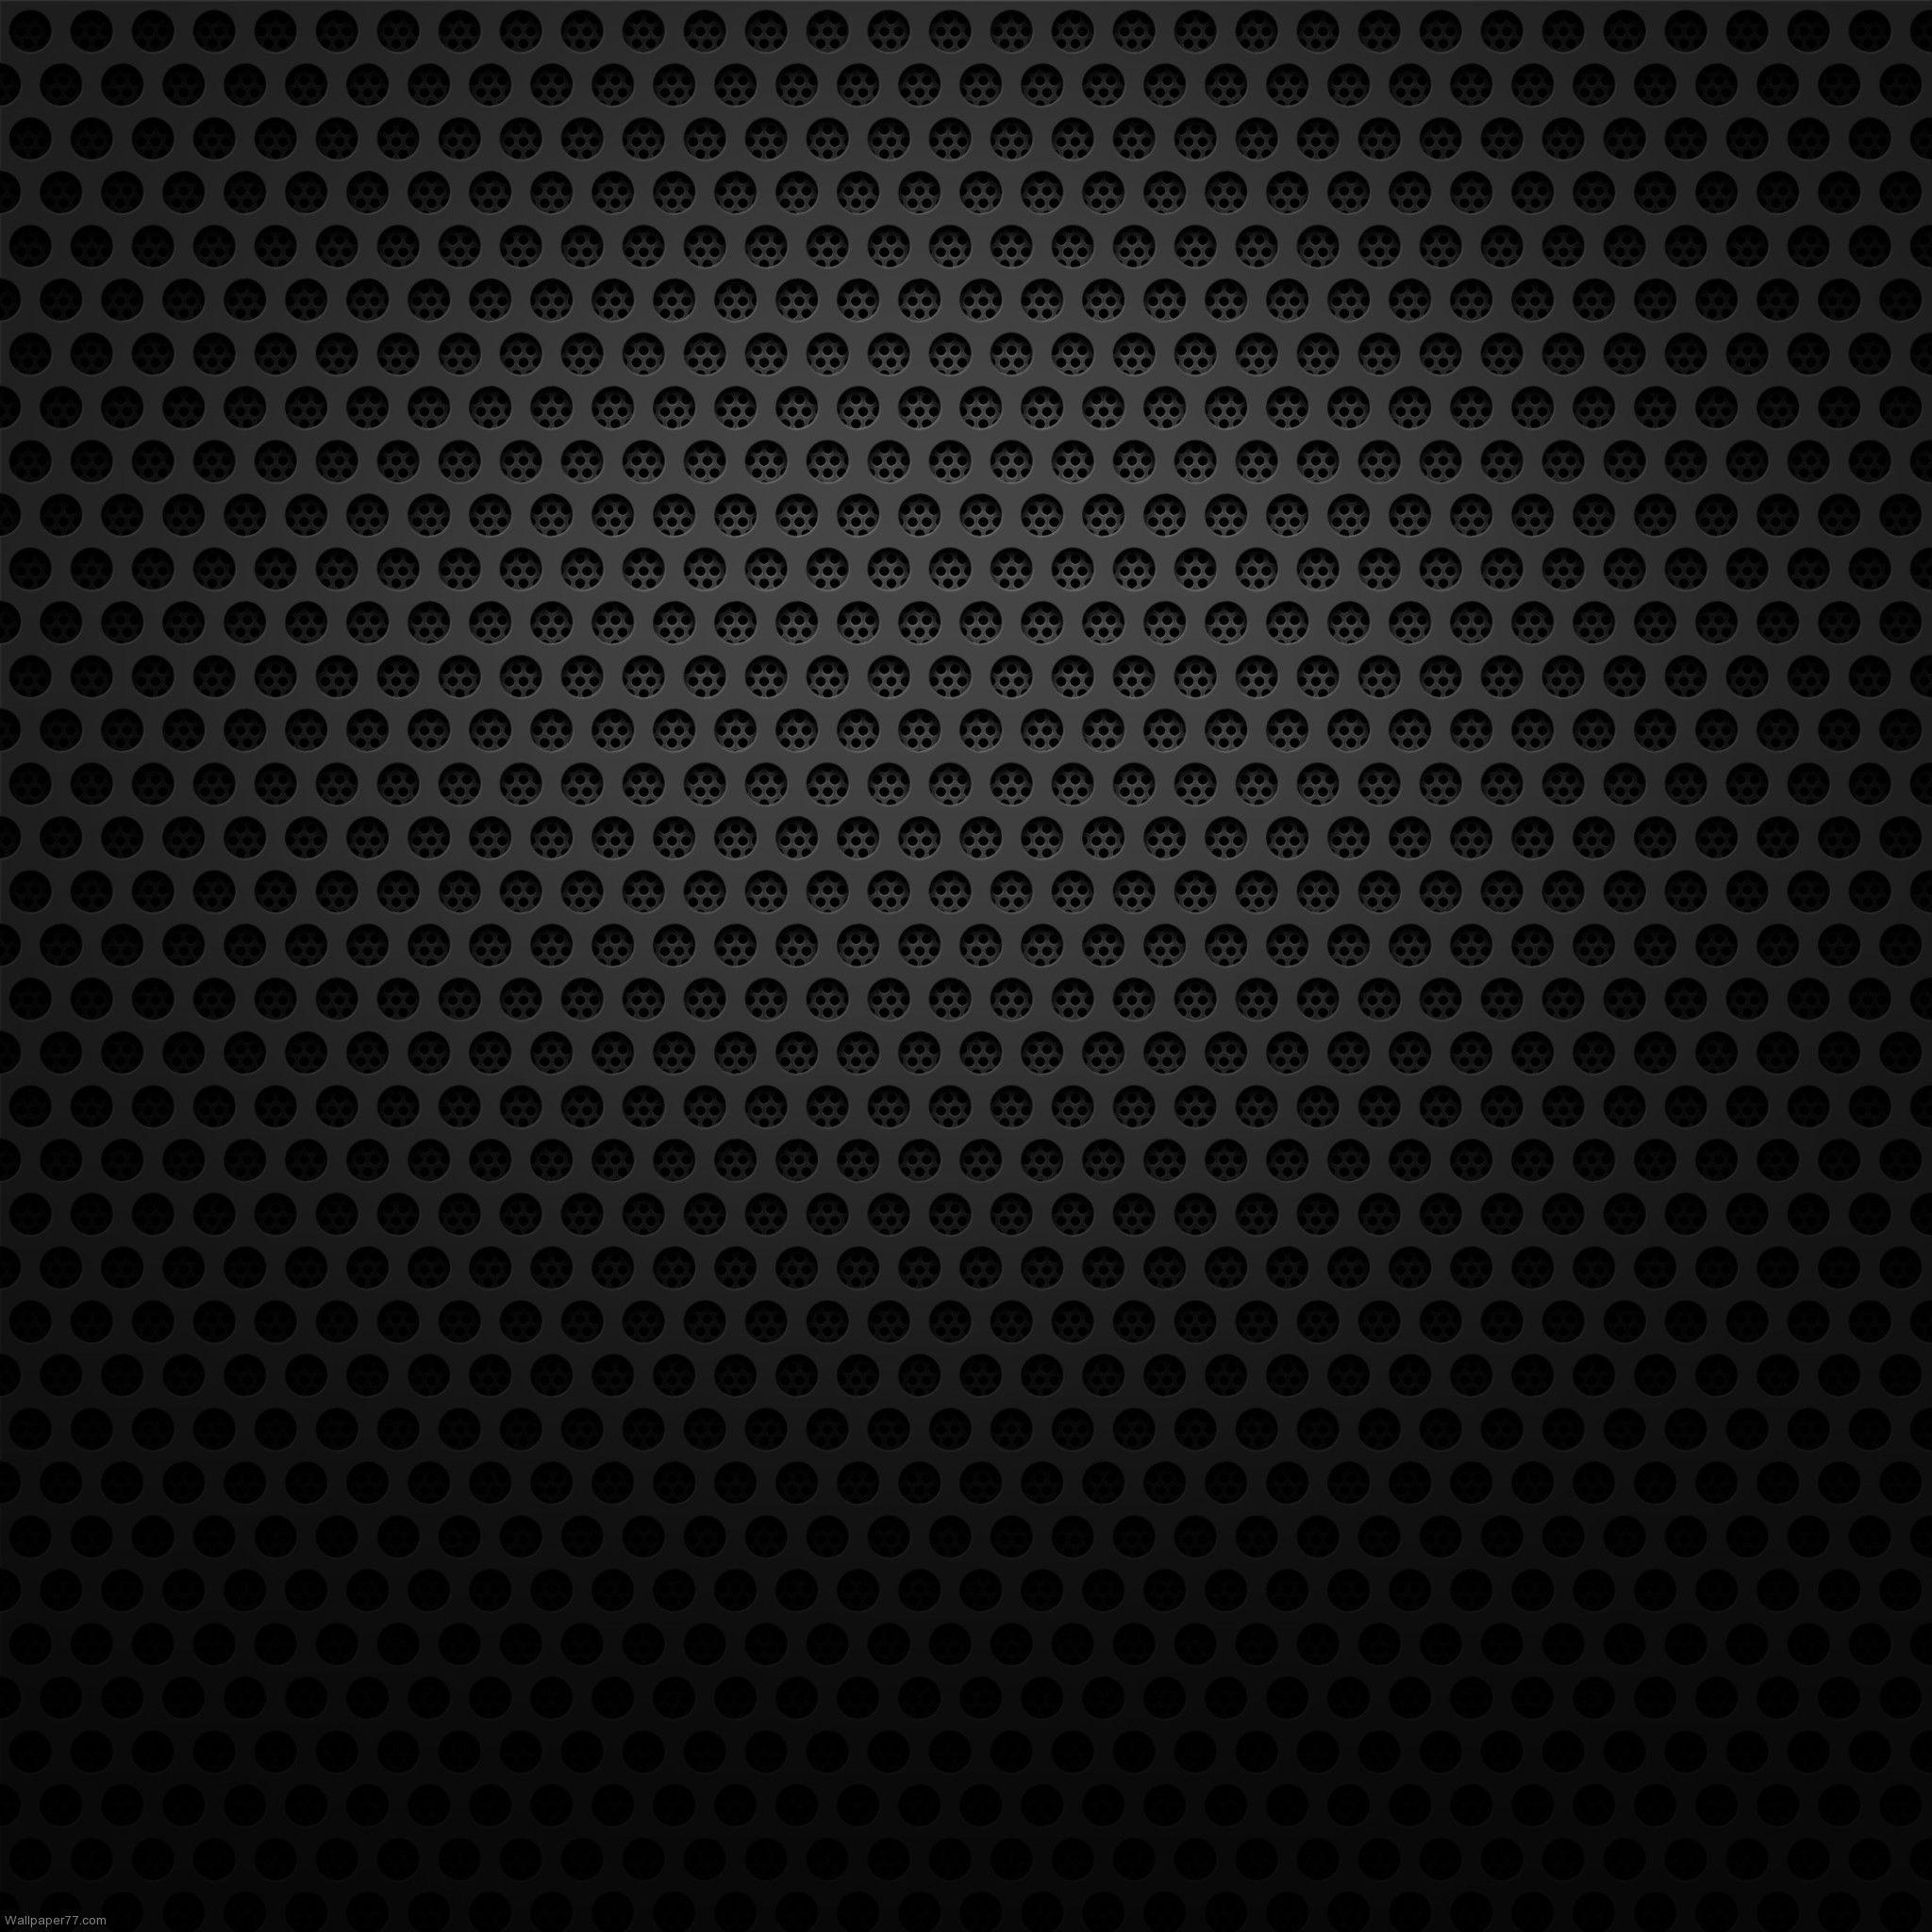 Black Hole, 2048x2048 pixels : Wallpapers tagged backgrounds